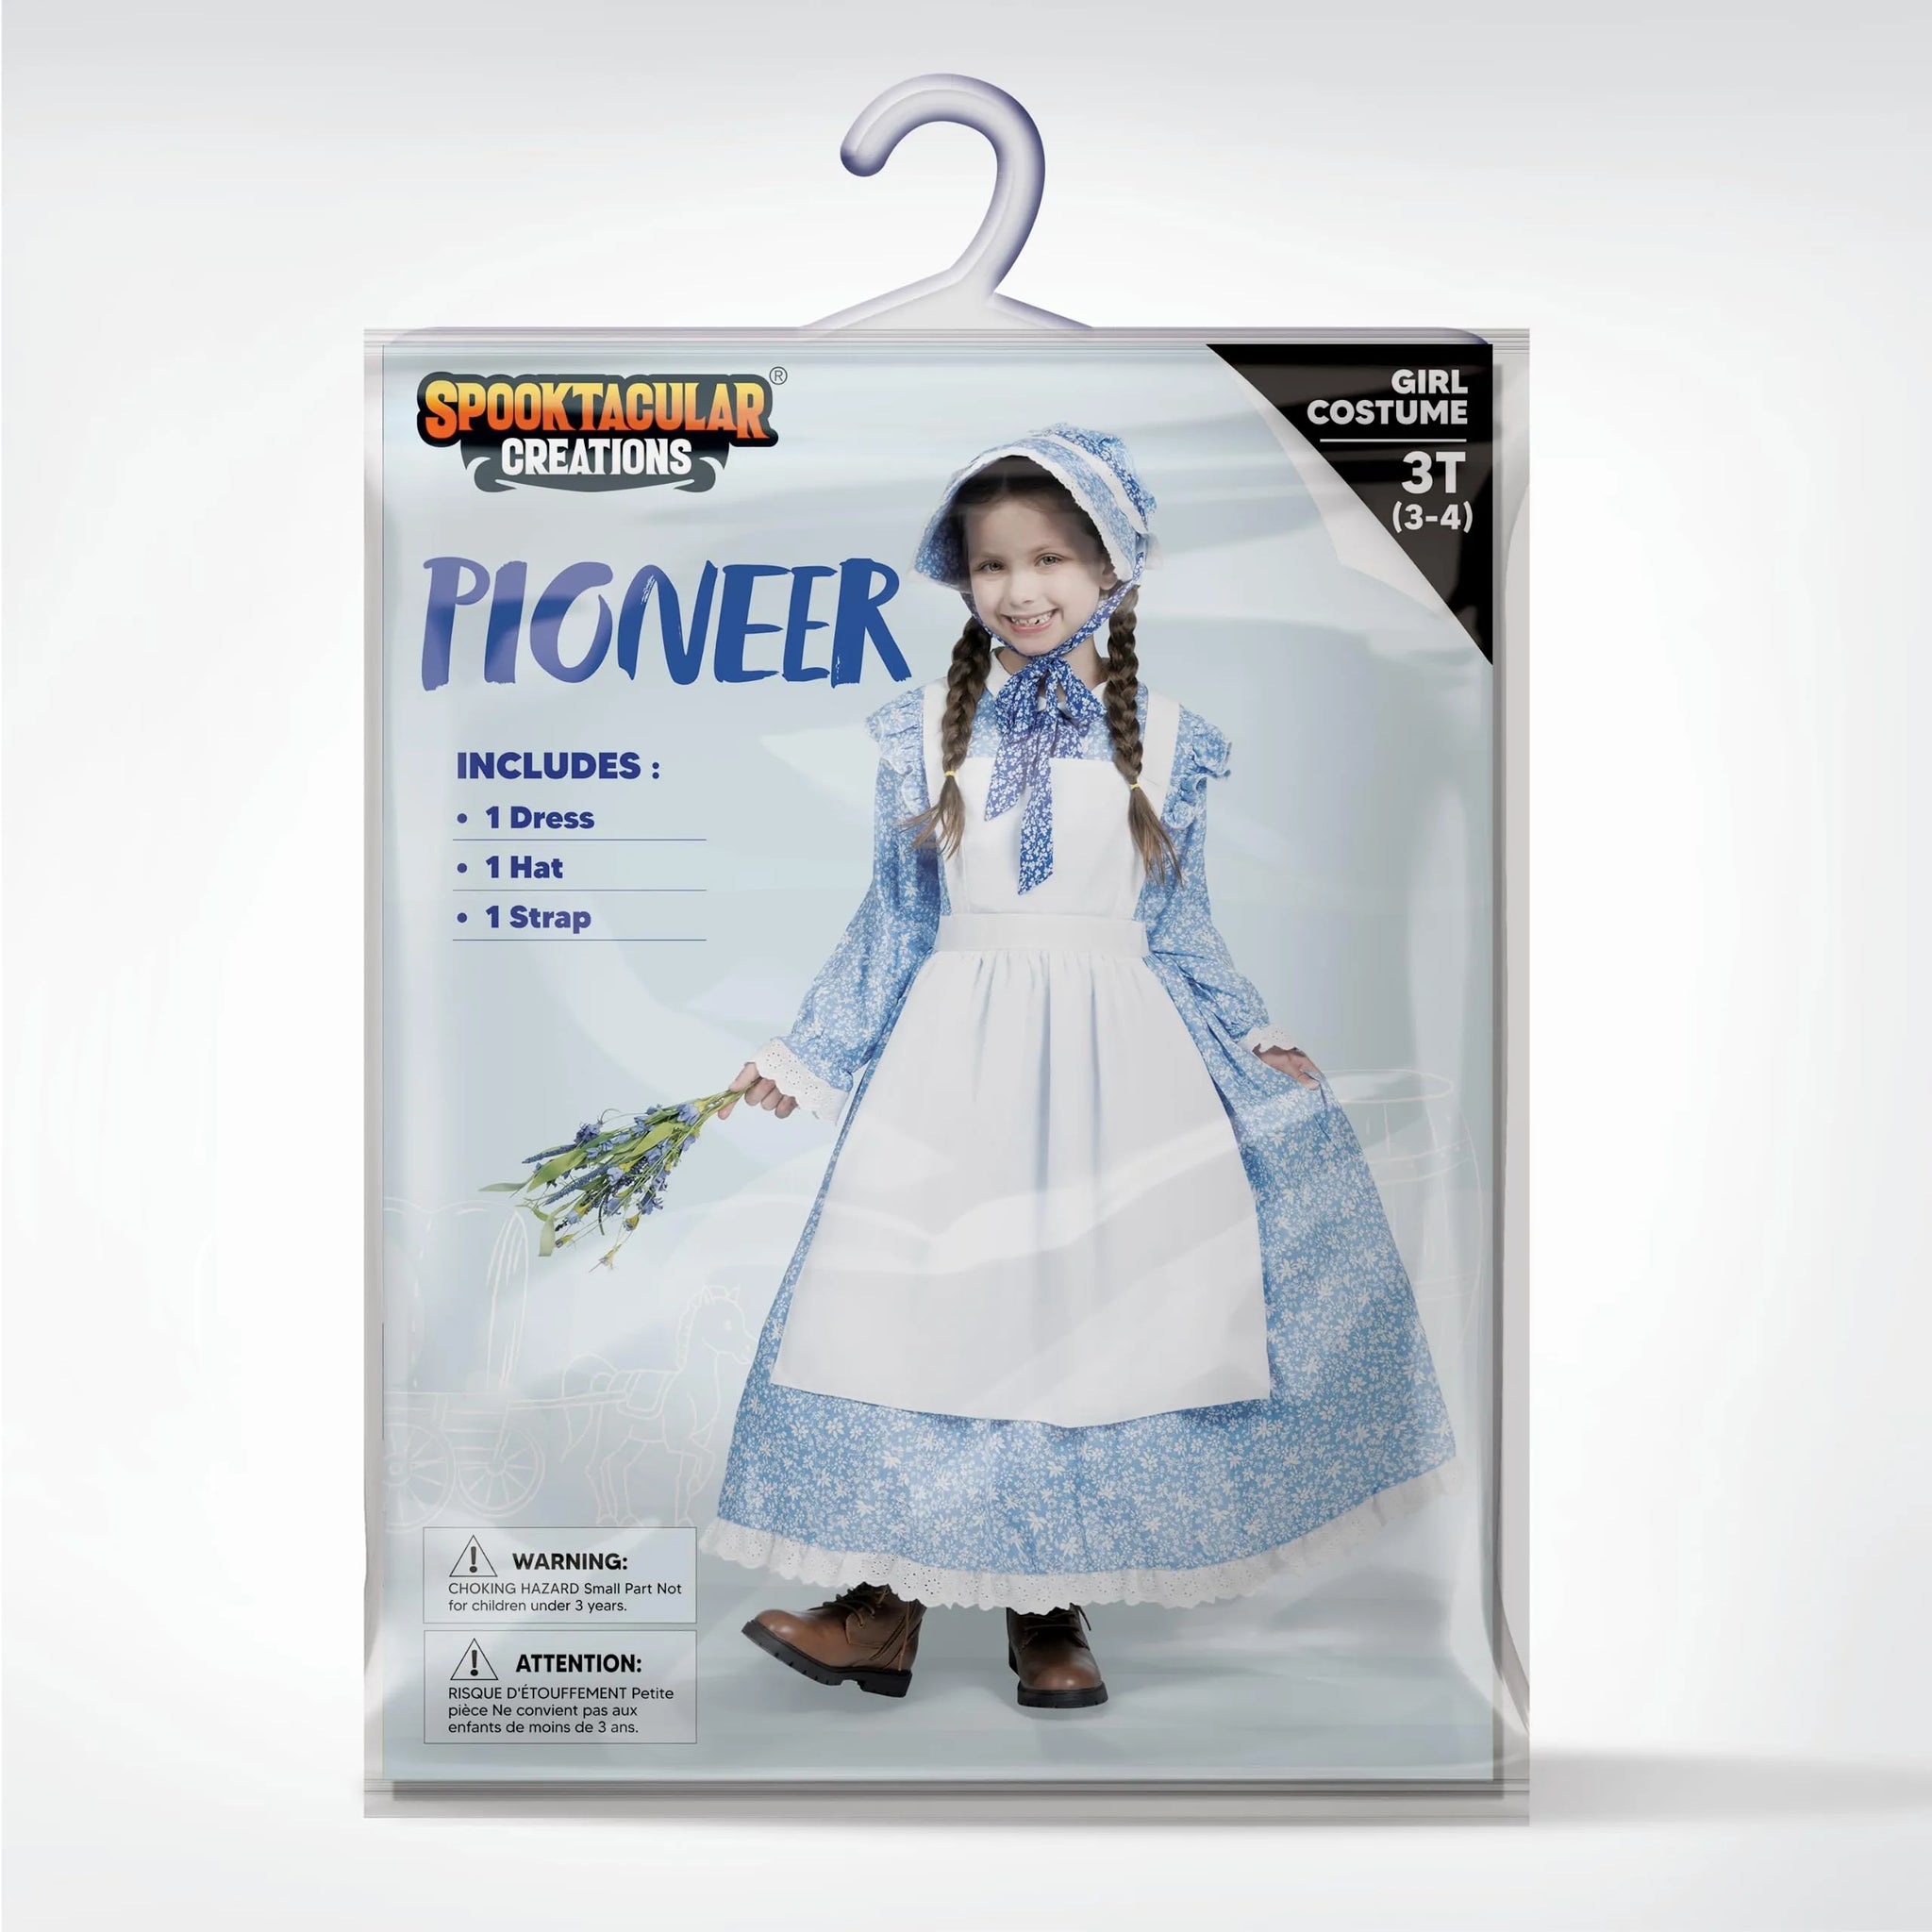 Pioneer Girl Costume, Colonial Dress Costume for Girls